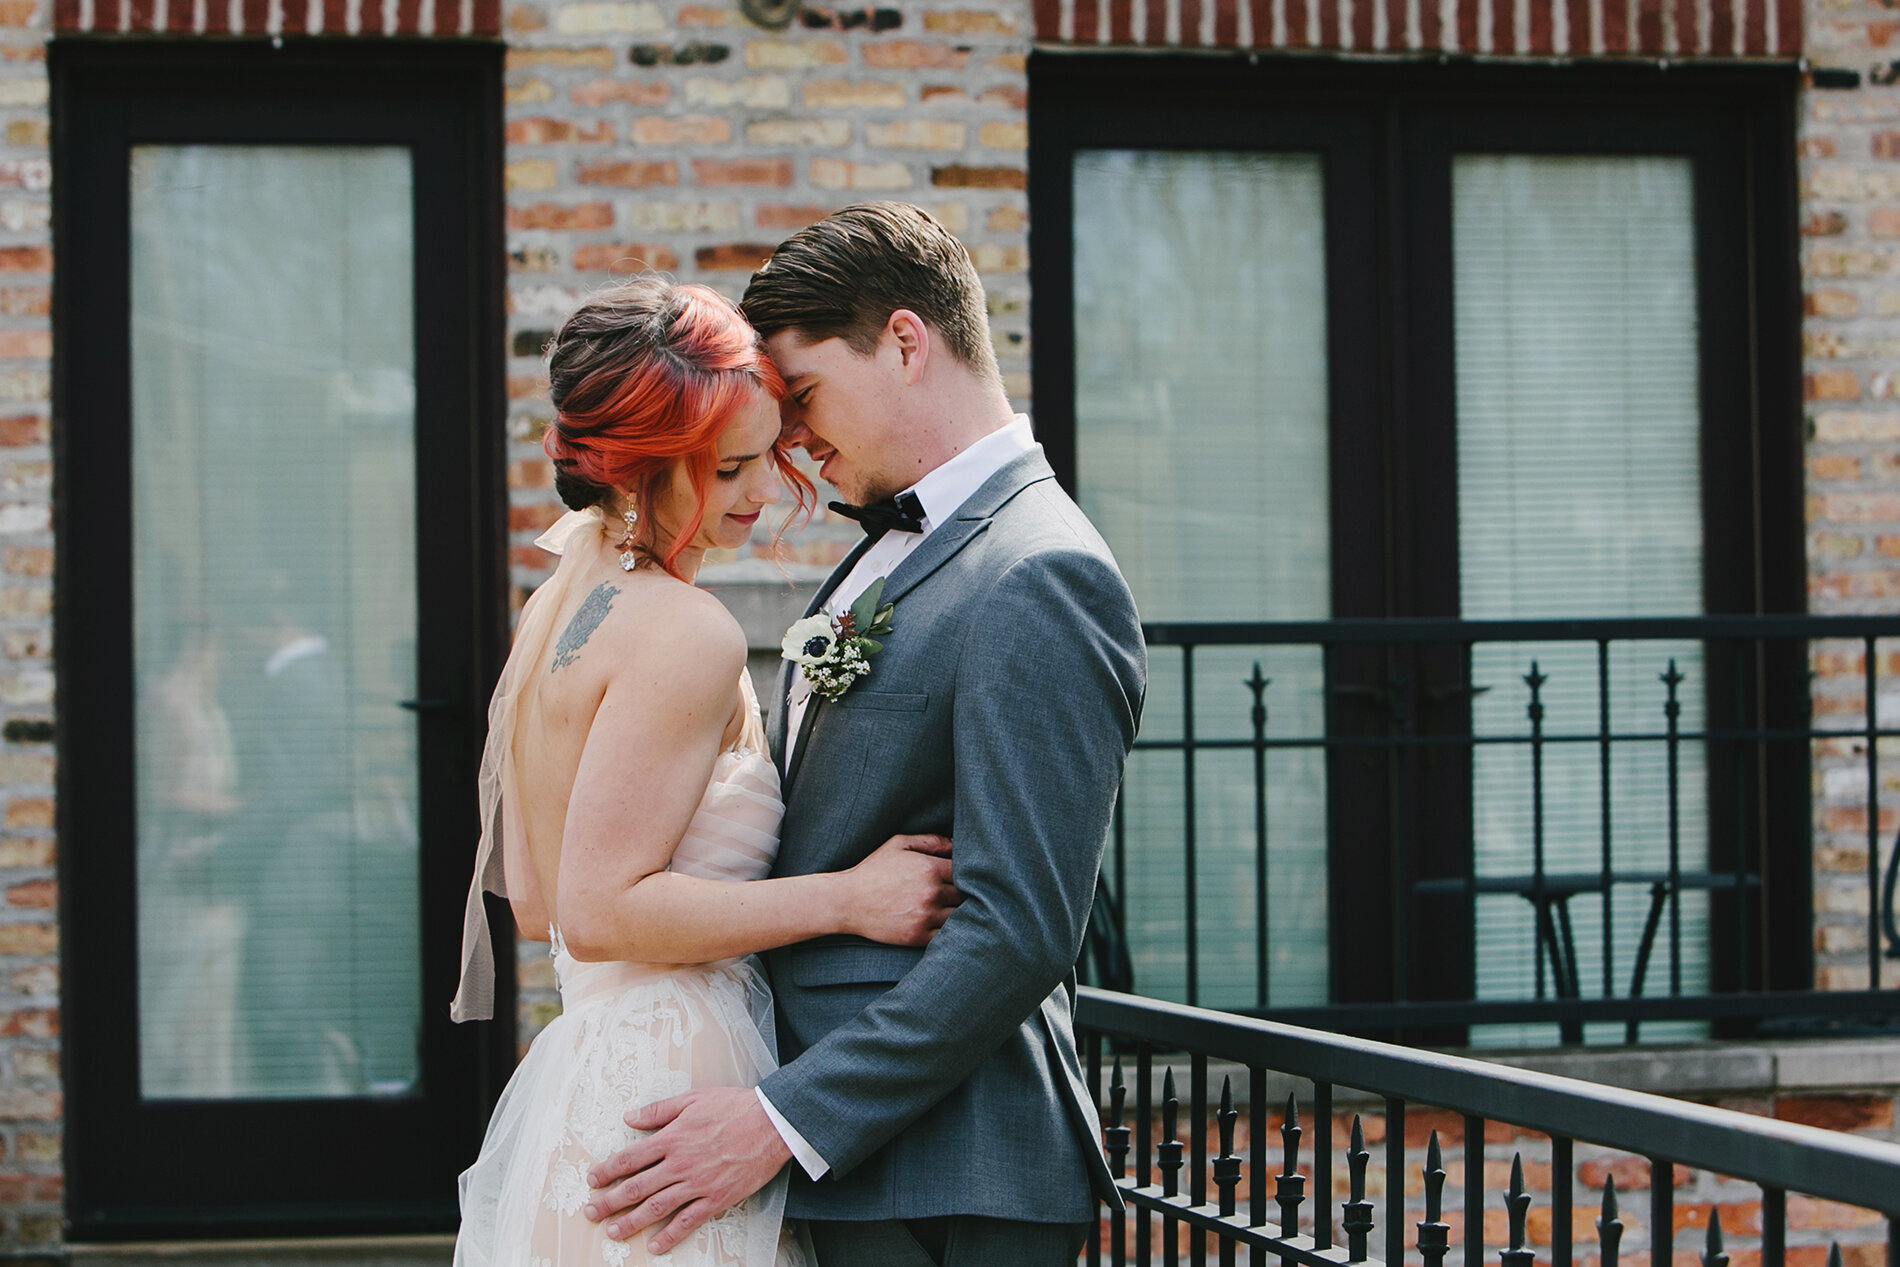 Travel Styled Elopement Shoot at Historic B&amp;B in Chicago captured by Dawn E Roscoe Photography. Visit CHItheeWED.com for more wedding inspiration!